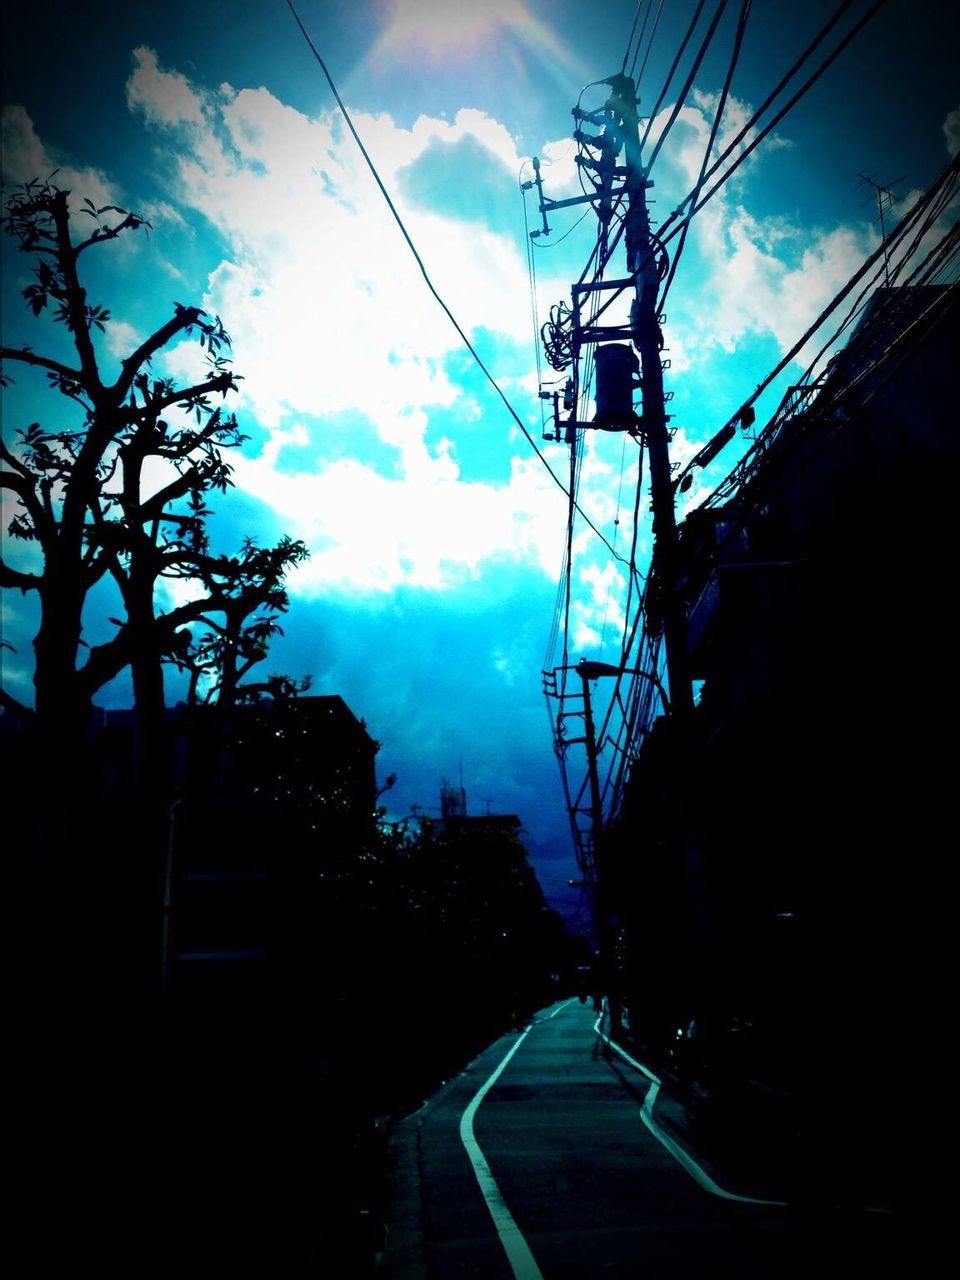 cable, power line, connection, transportation, sky, silhouette, outdoors, electricity, no people, day, electricity pylon, tree, technology, nature